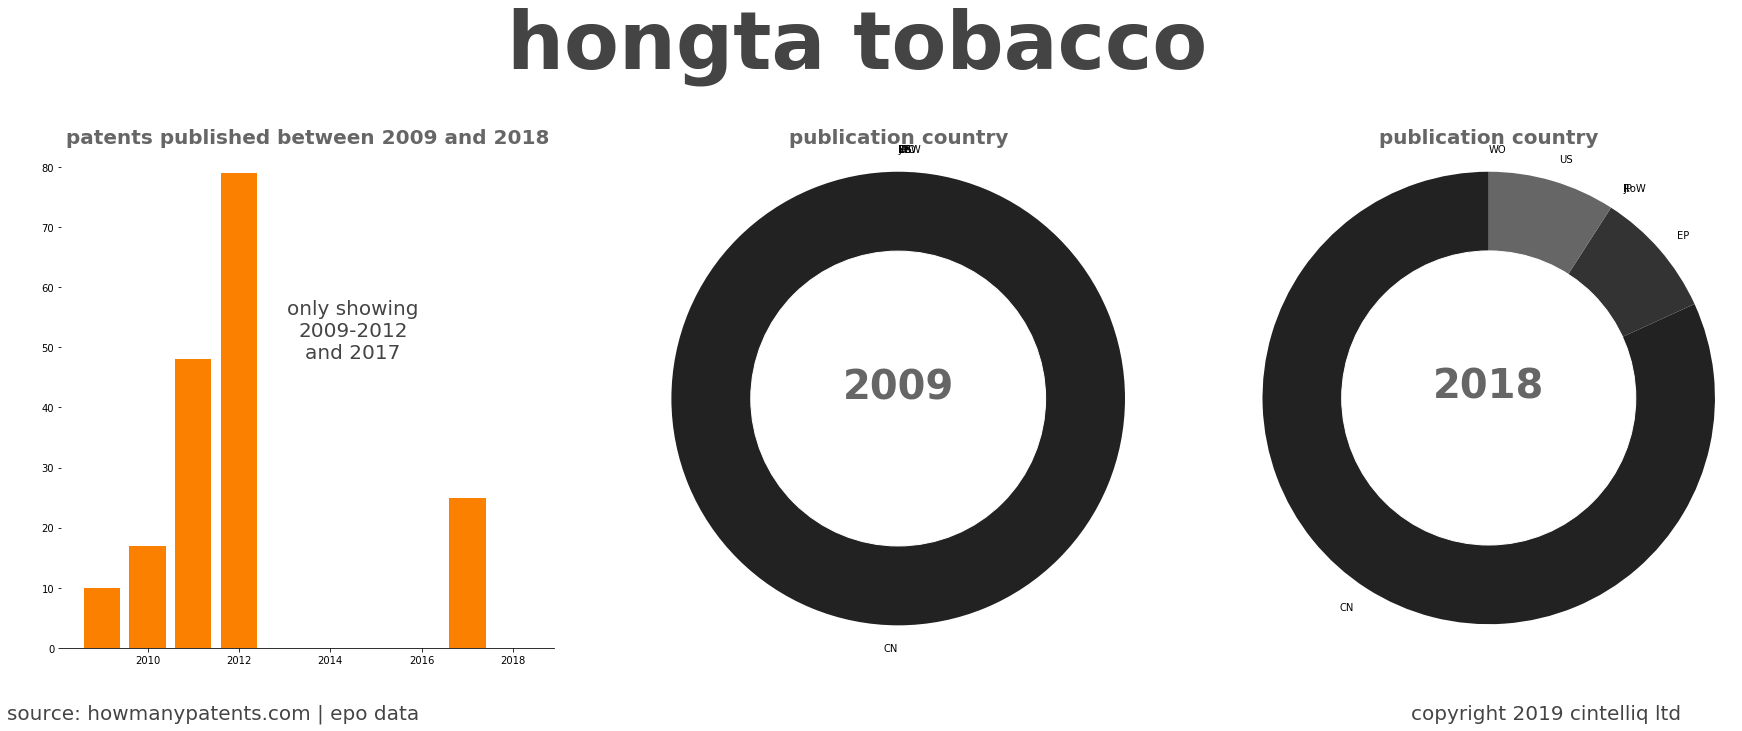 summary of patents for Hongta Tobacco 